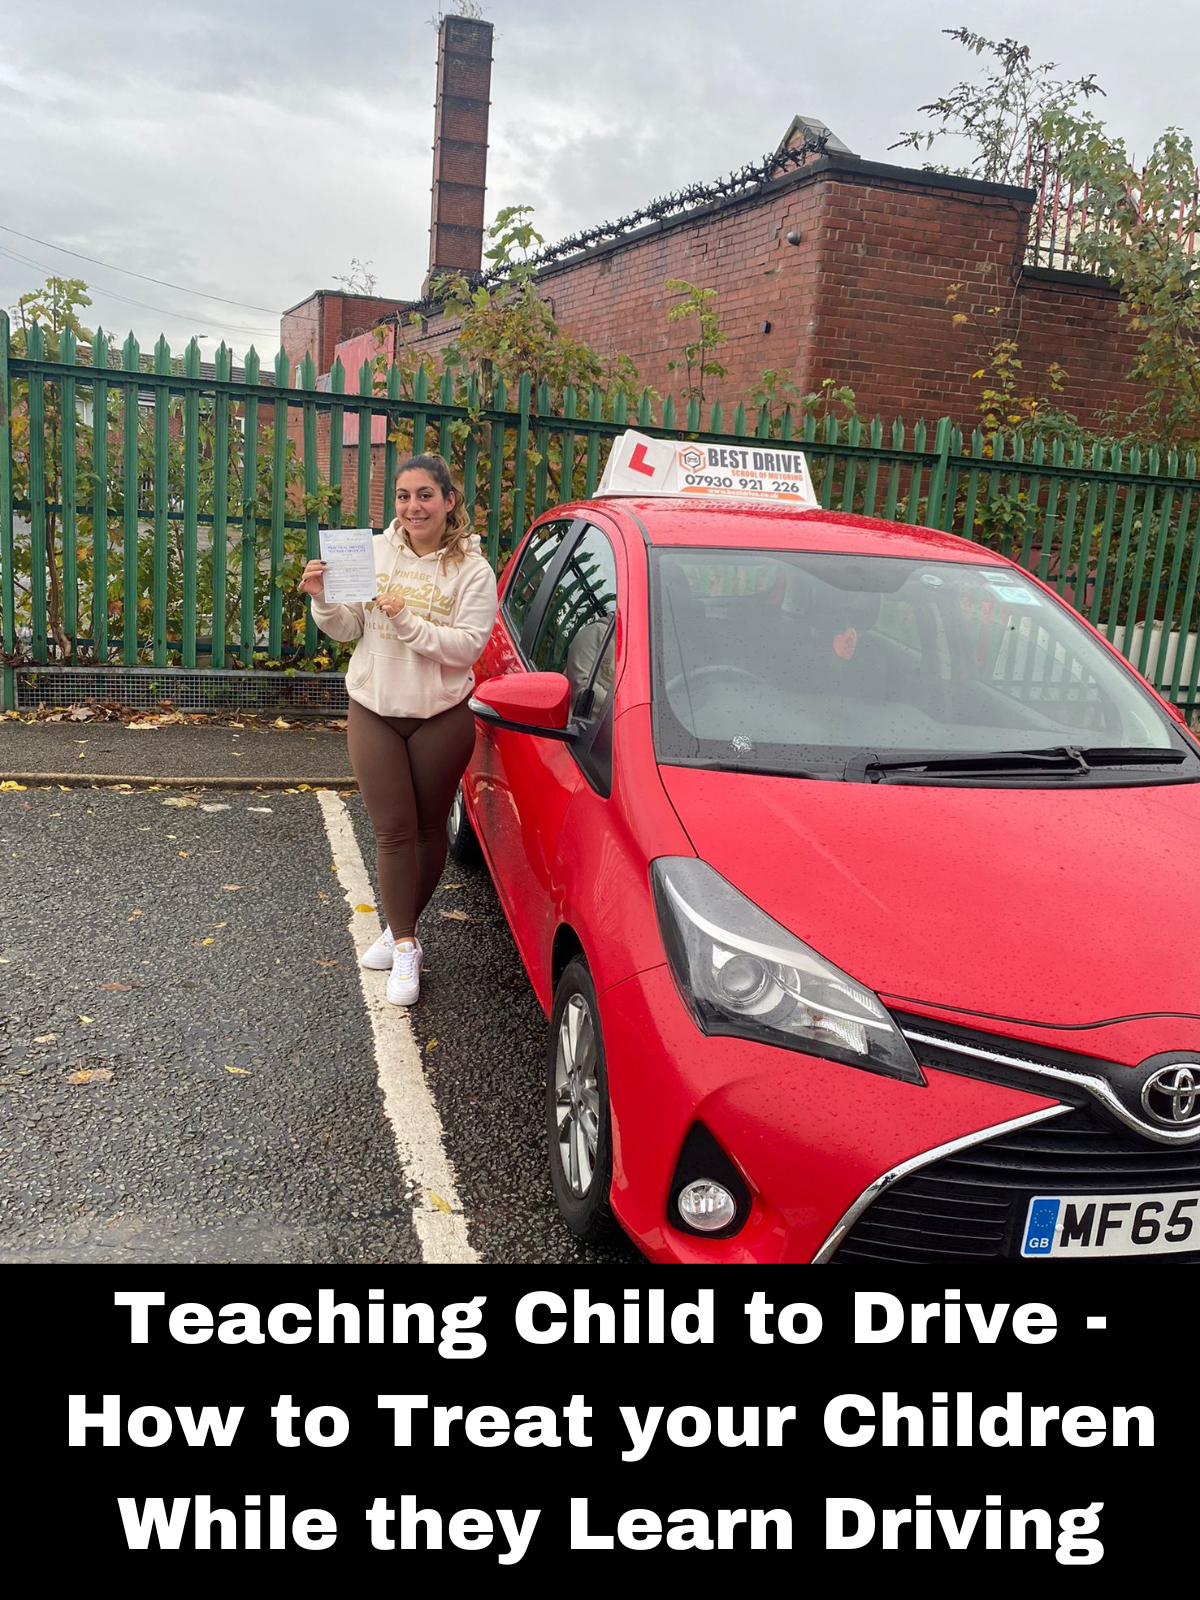 Teaching Child to Drive - How to Treat your Children While they Learn Driving